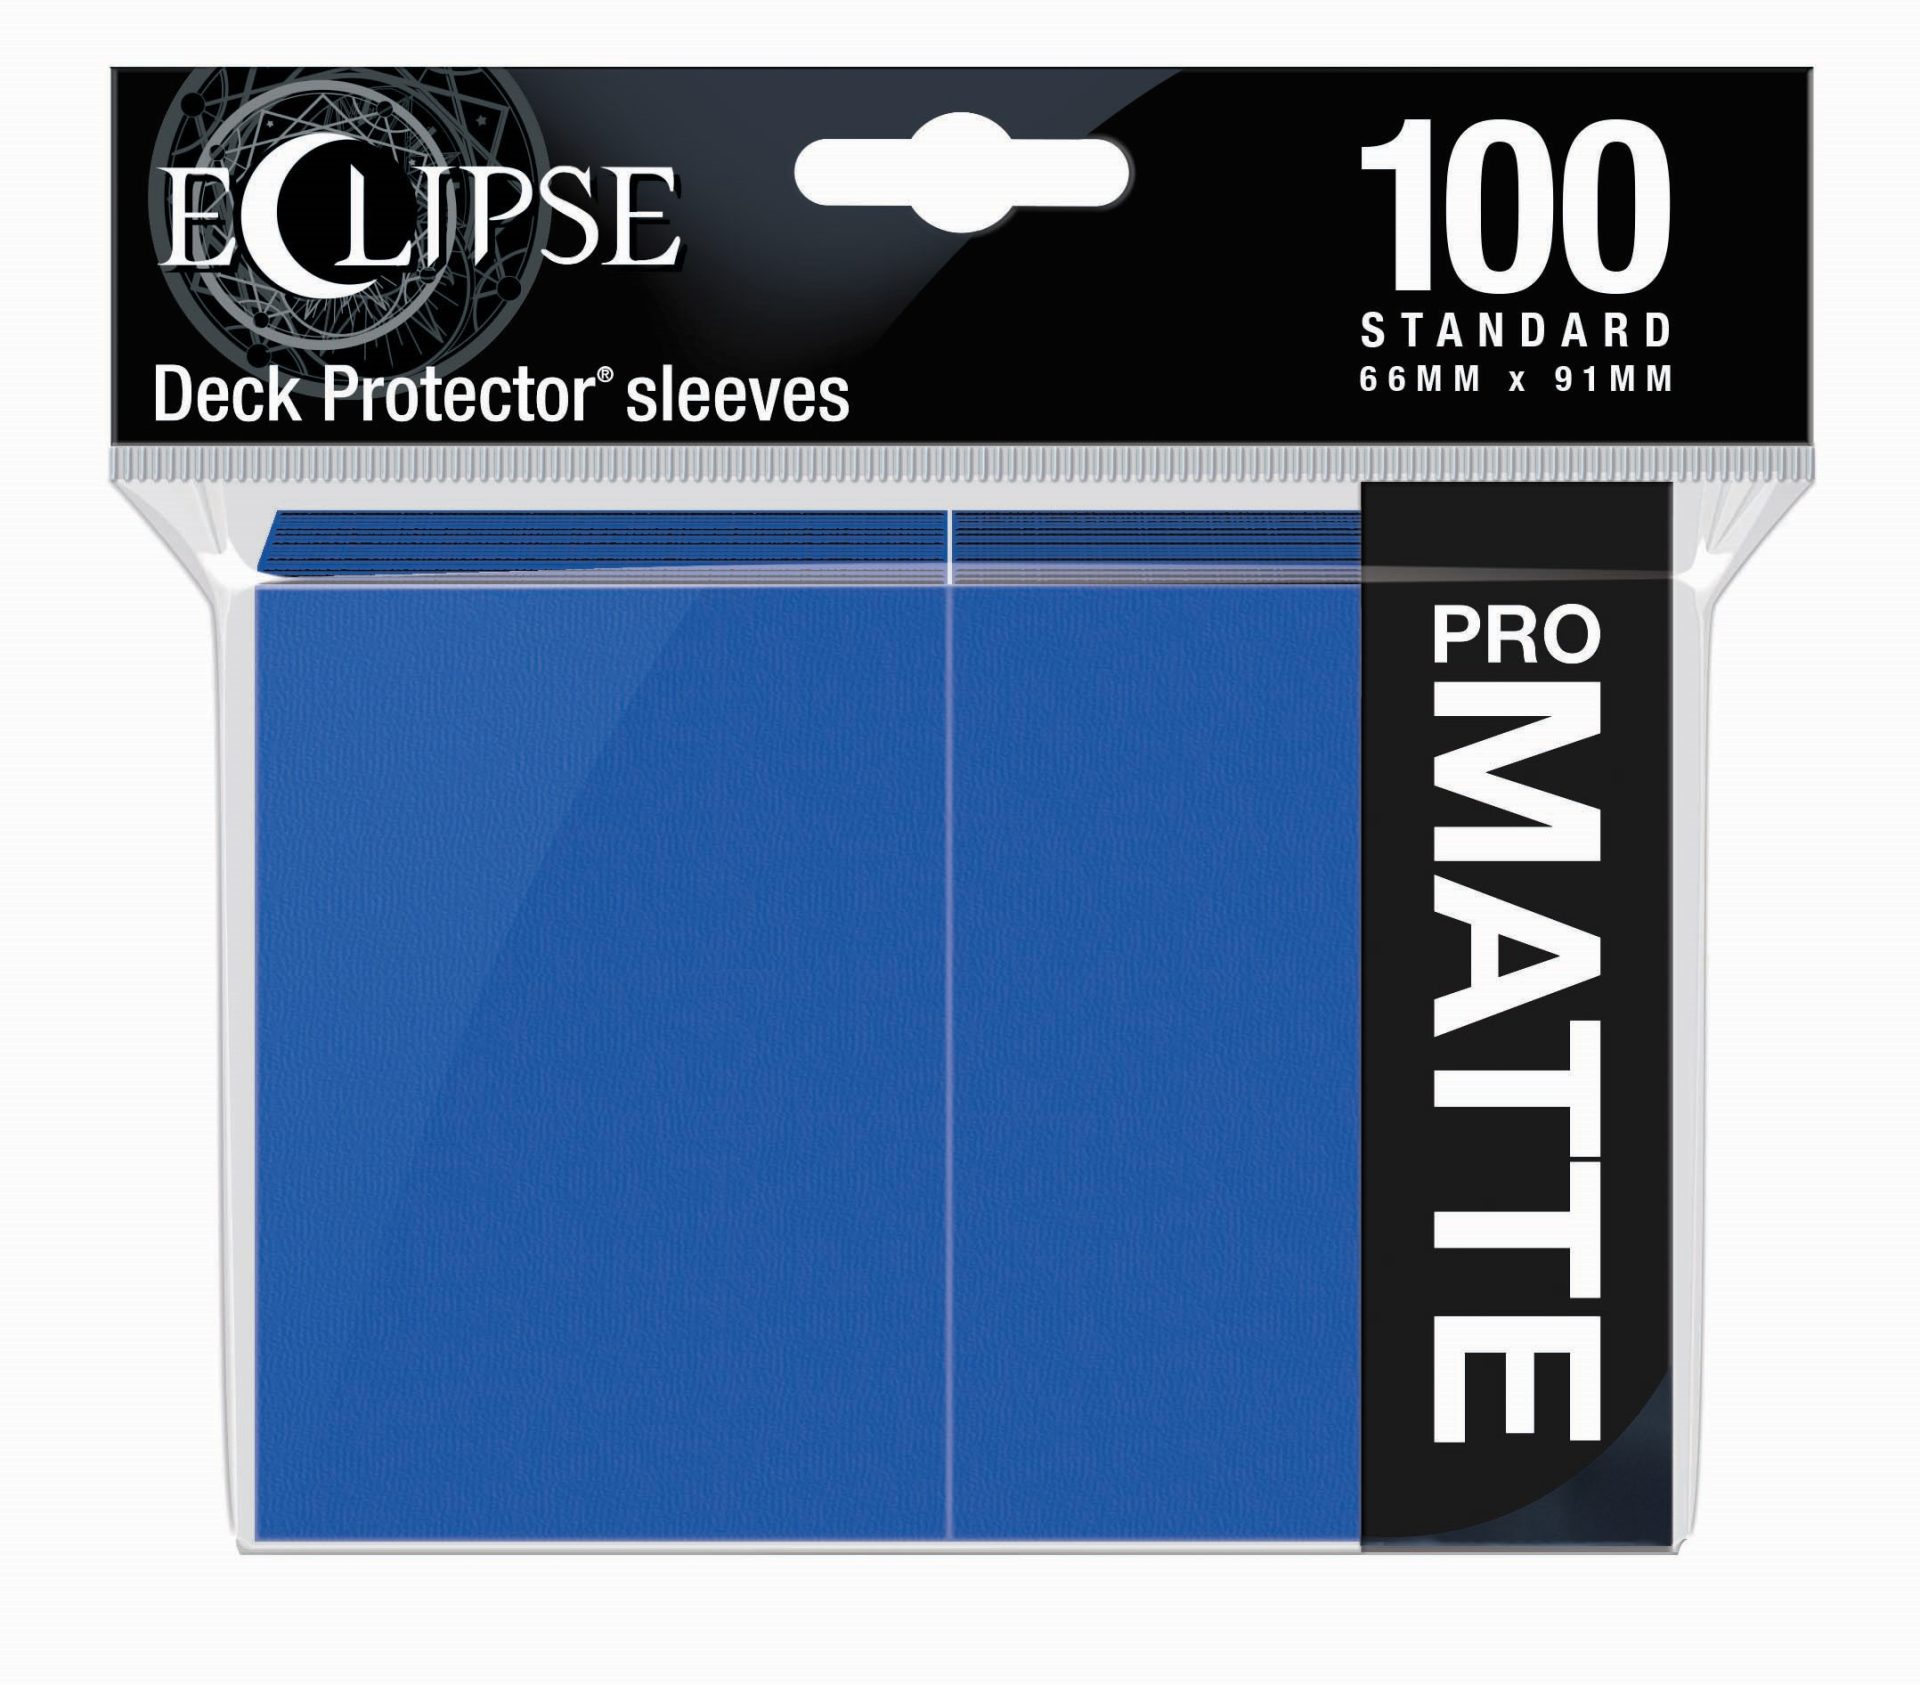 Ultra Pro Sleeves Eclipse Matte Pacific Blue 100-Count